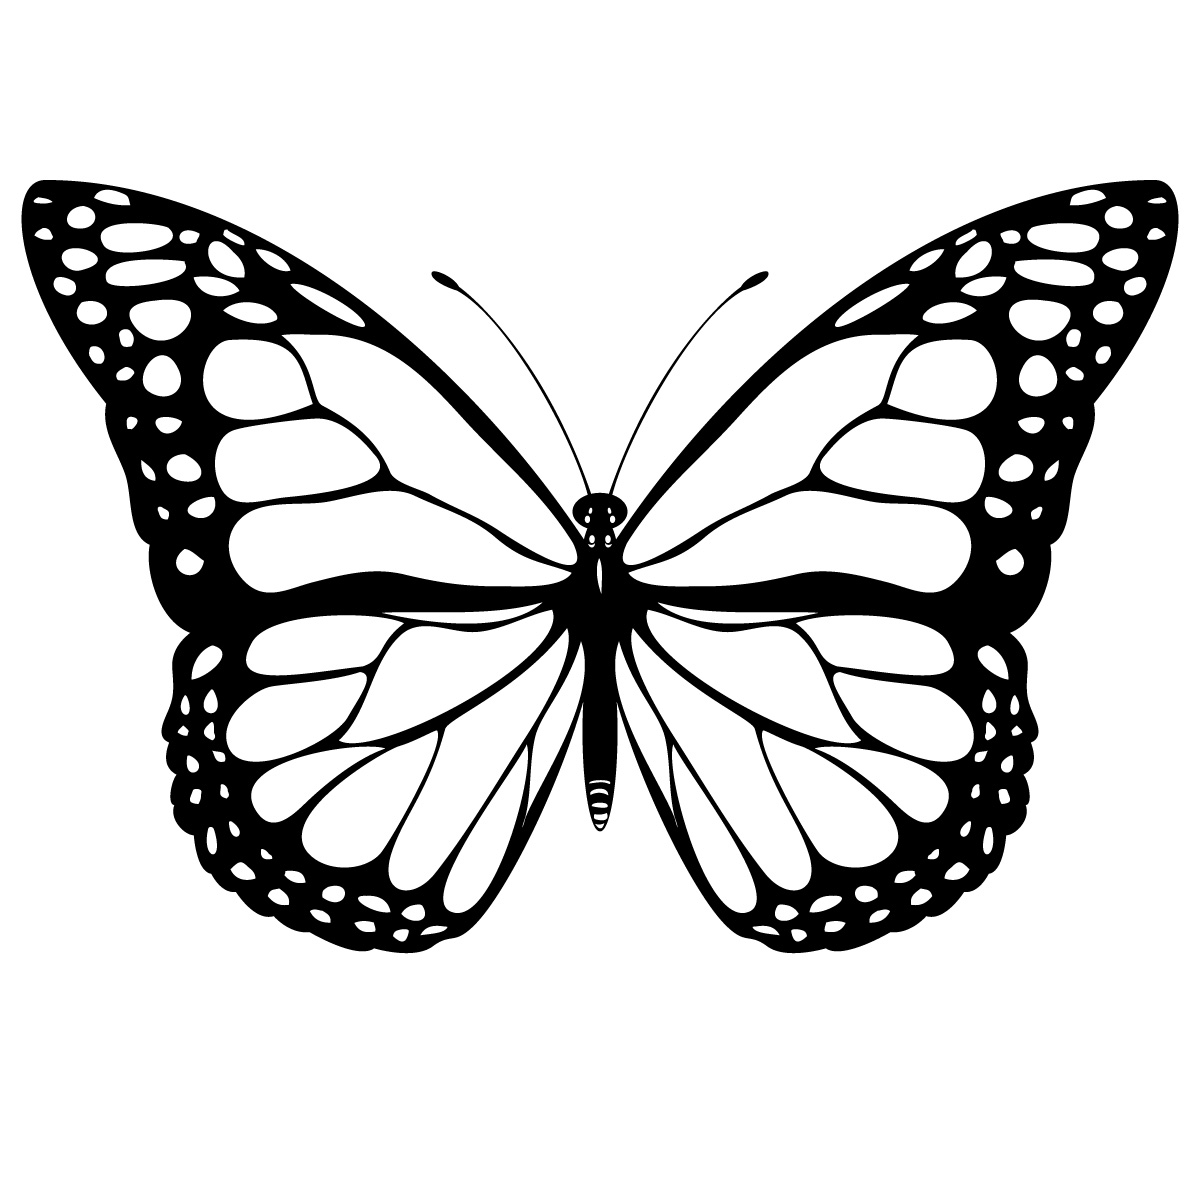 Butterfly Drawing With Details - ClipArt Best